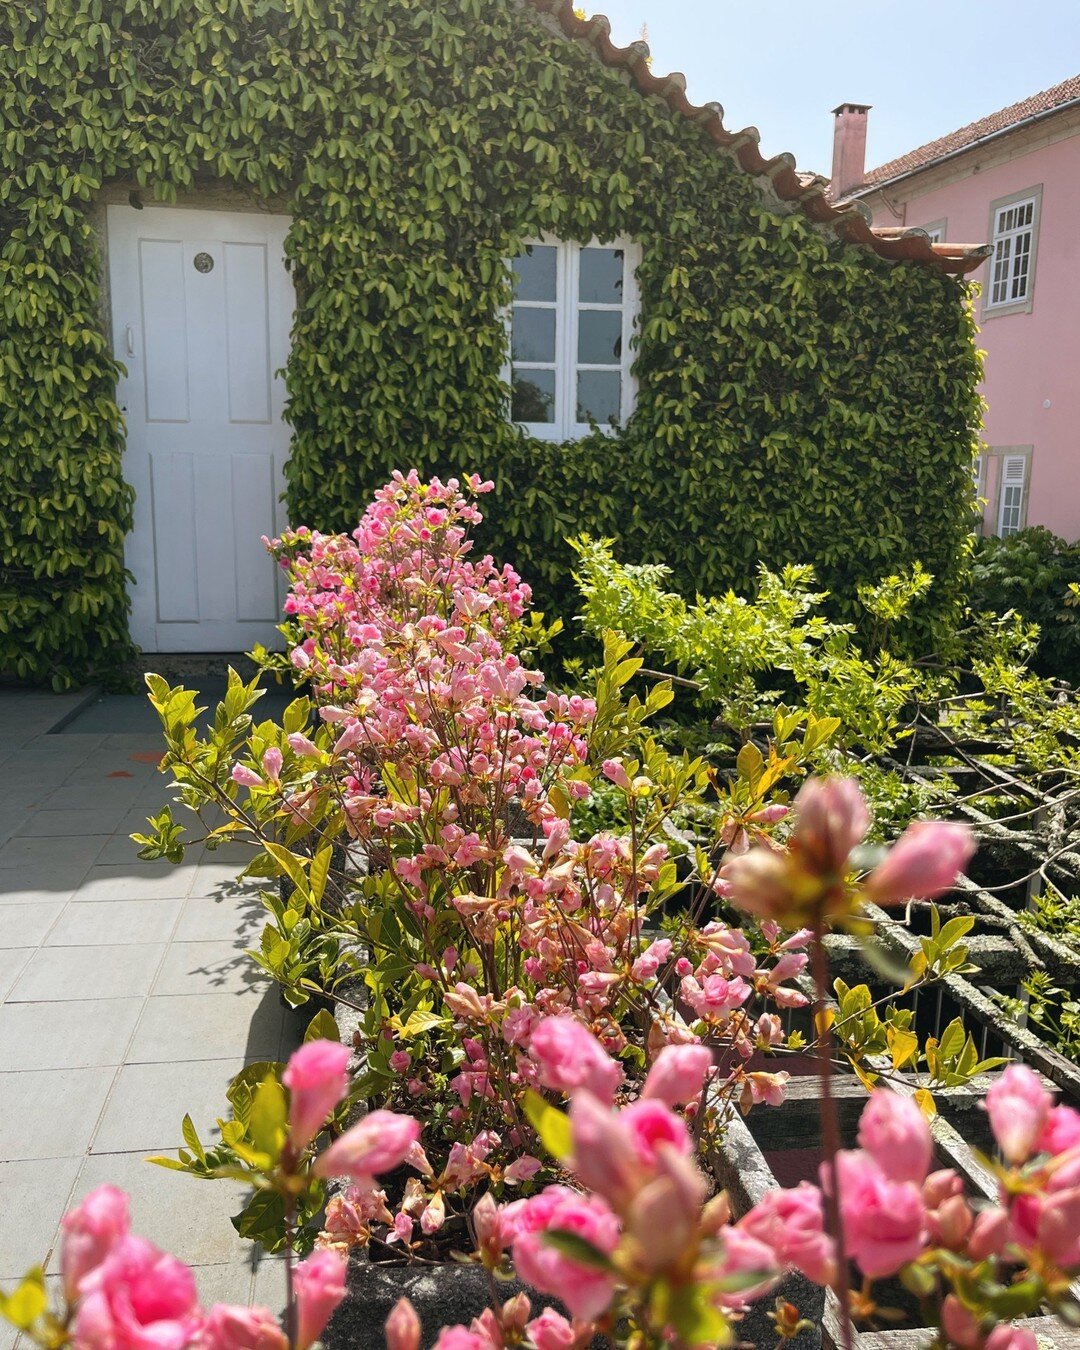 Summer pink vibes from pink paradise!

Enjoy a vacation with us 😎
.
.
.
#PalaceteRosa #Aveiro #Portugal #eventspace #pinkmansion #summer2022 #summervibes  #weddingvenue #vacations #guesthouse #destinationwedding #millenialpink #portugueseweddings #w